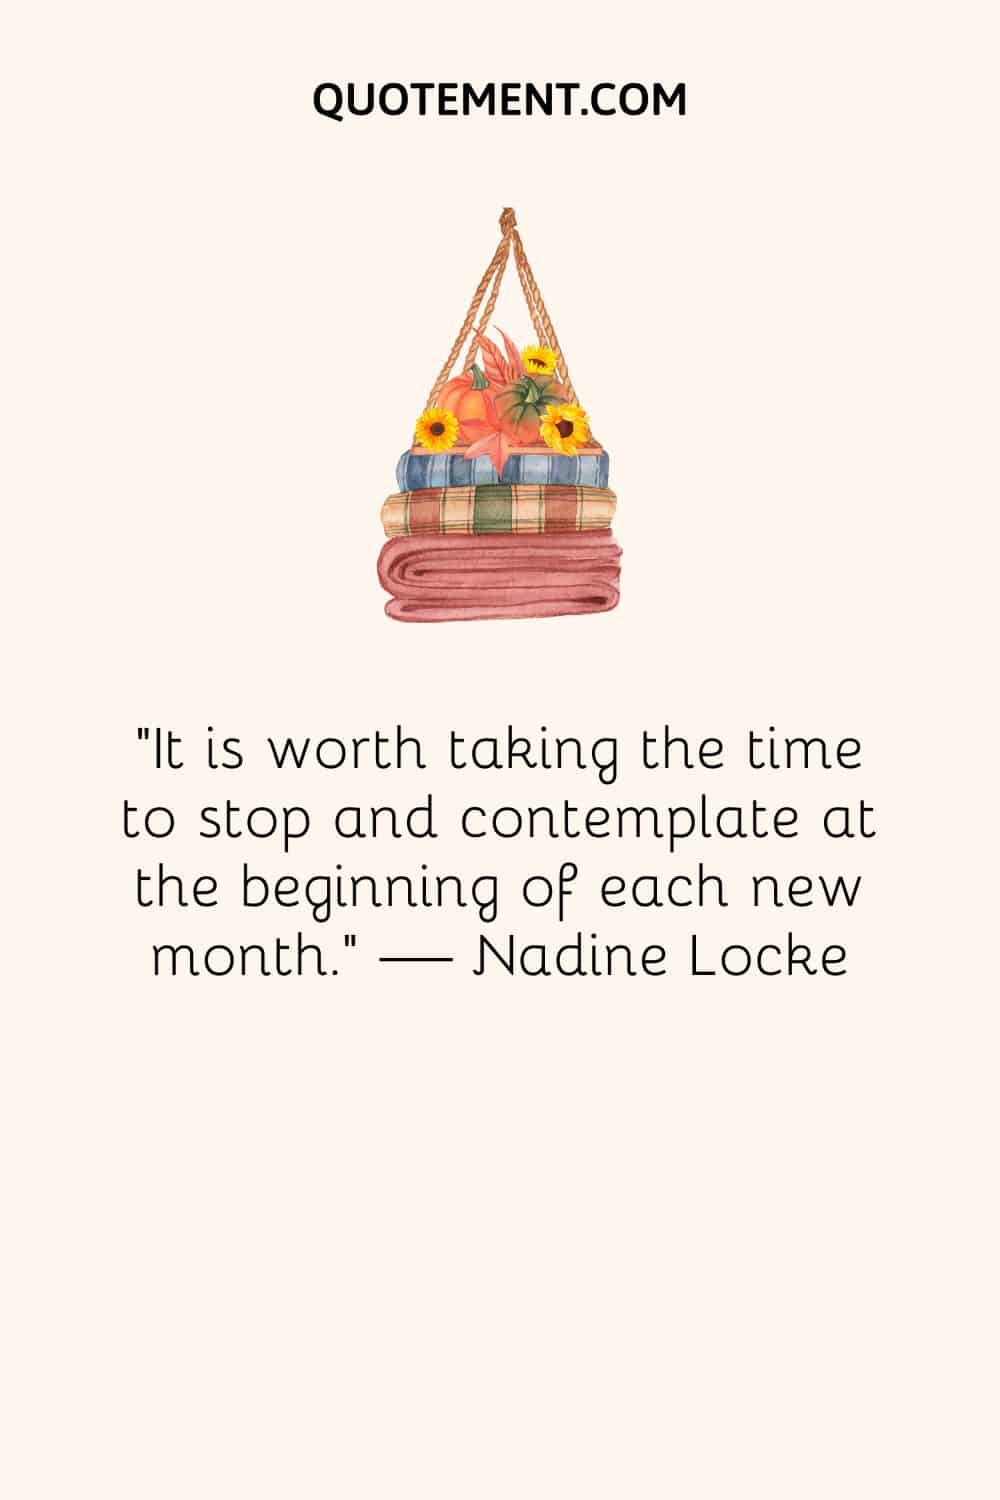 “It is worth taking the time to stop and contemplate at the beginning of each new month.” — Nadine Locke